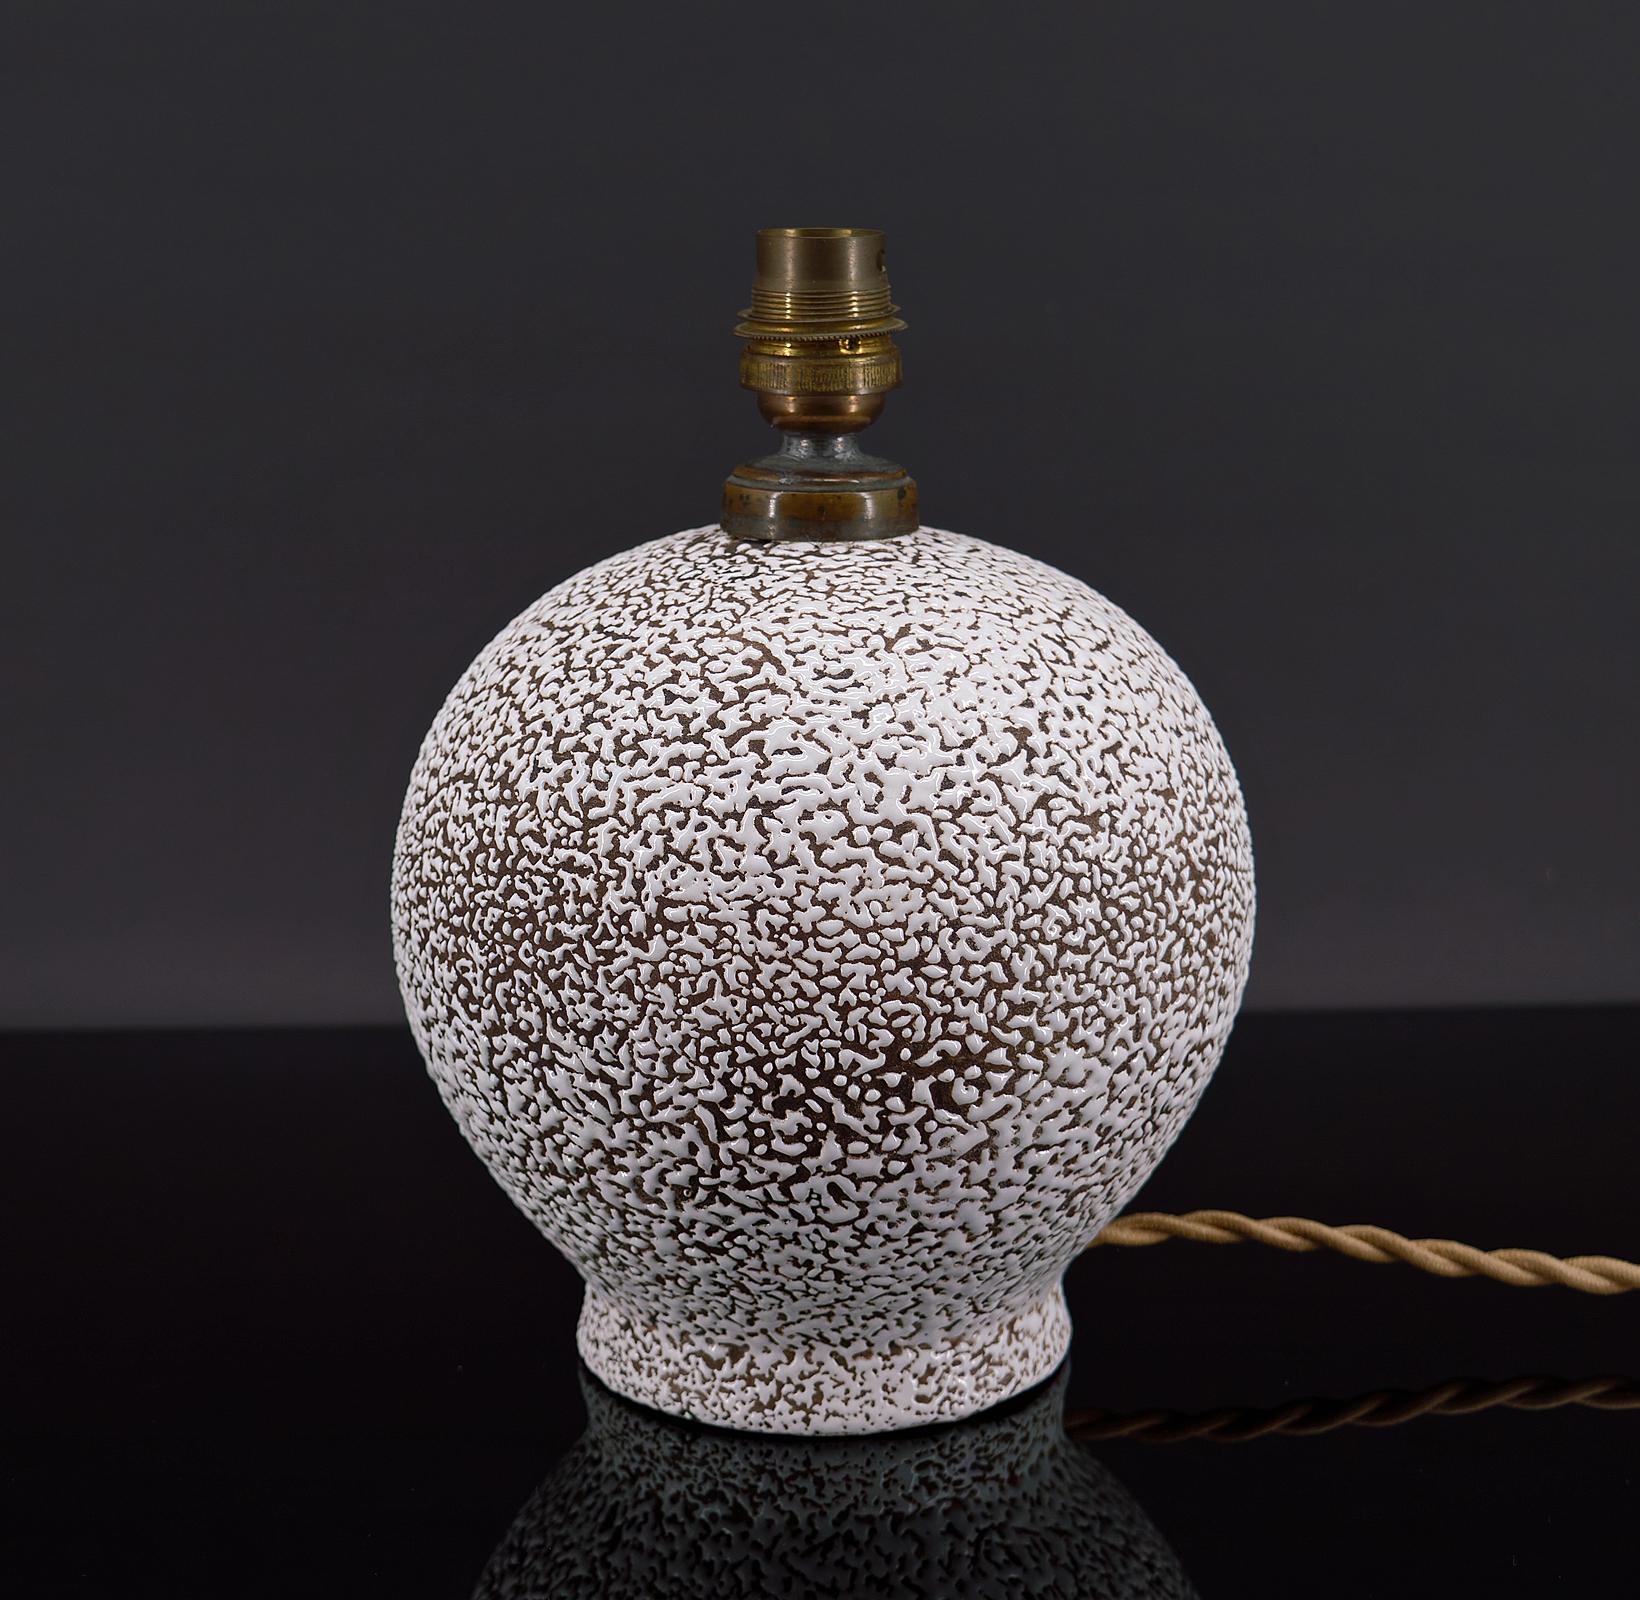 Elegant ball lamp in enamelled crisp ceramic.
Spherical shape. White email on brown background.

Art Deco, France, around 1930.
In the style of the productions of Jean Besnard.

In good condition, electricity checked.

Dimensions :
Height